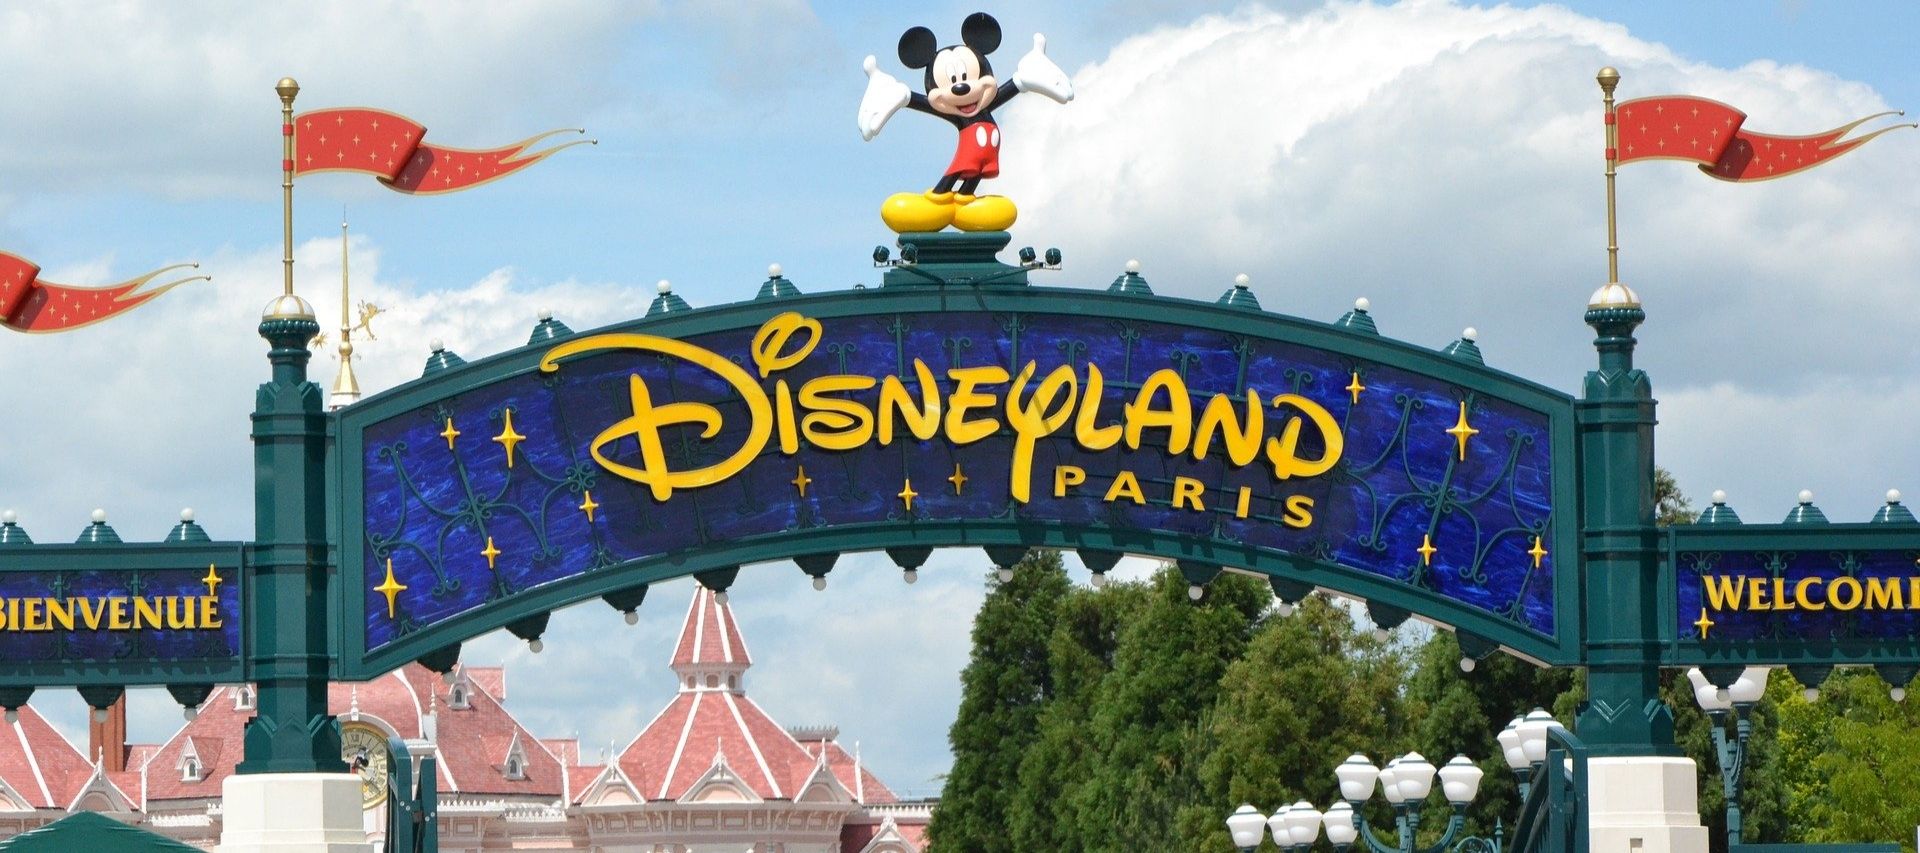 The Top 10 Attractions for Younger Kids in Disneyland Paris